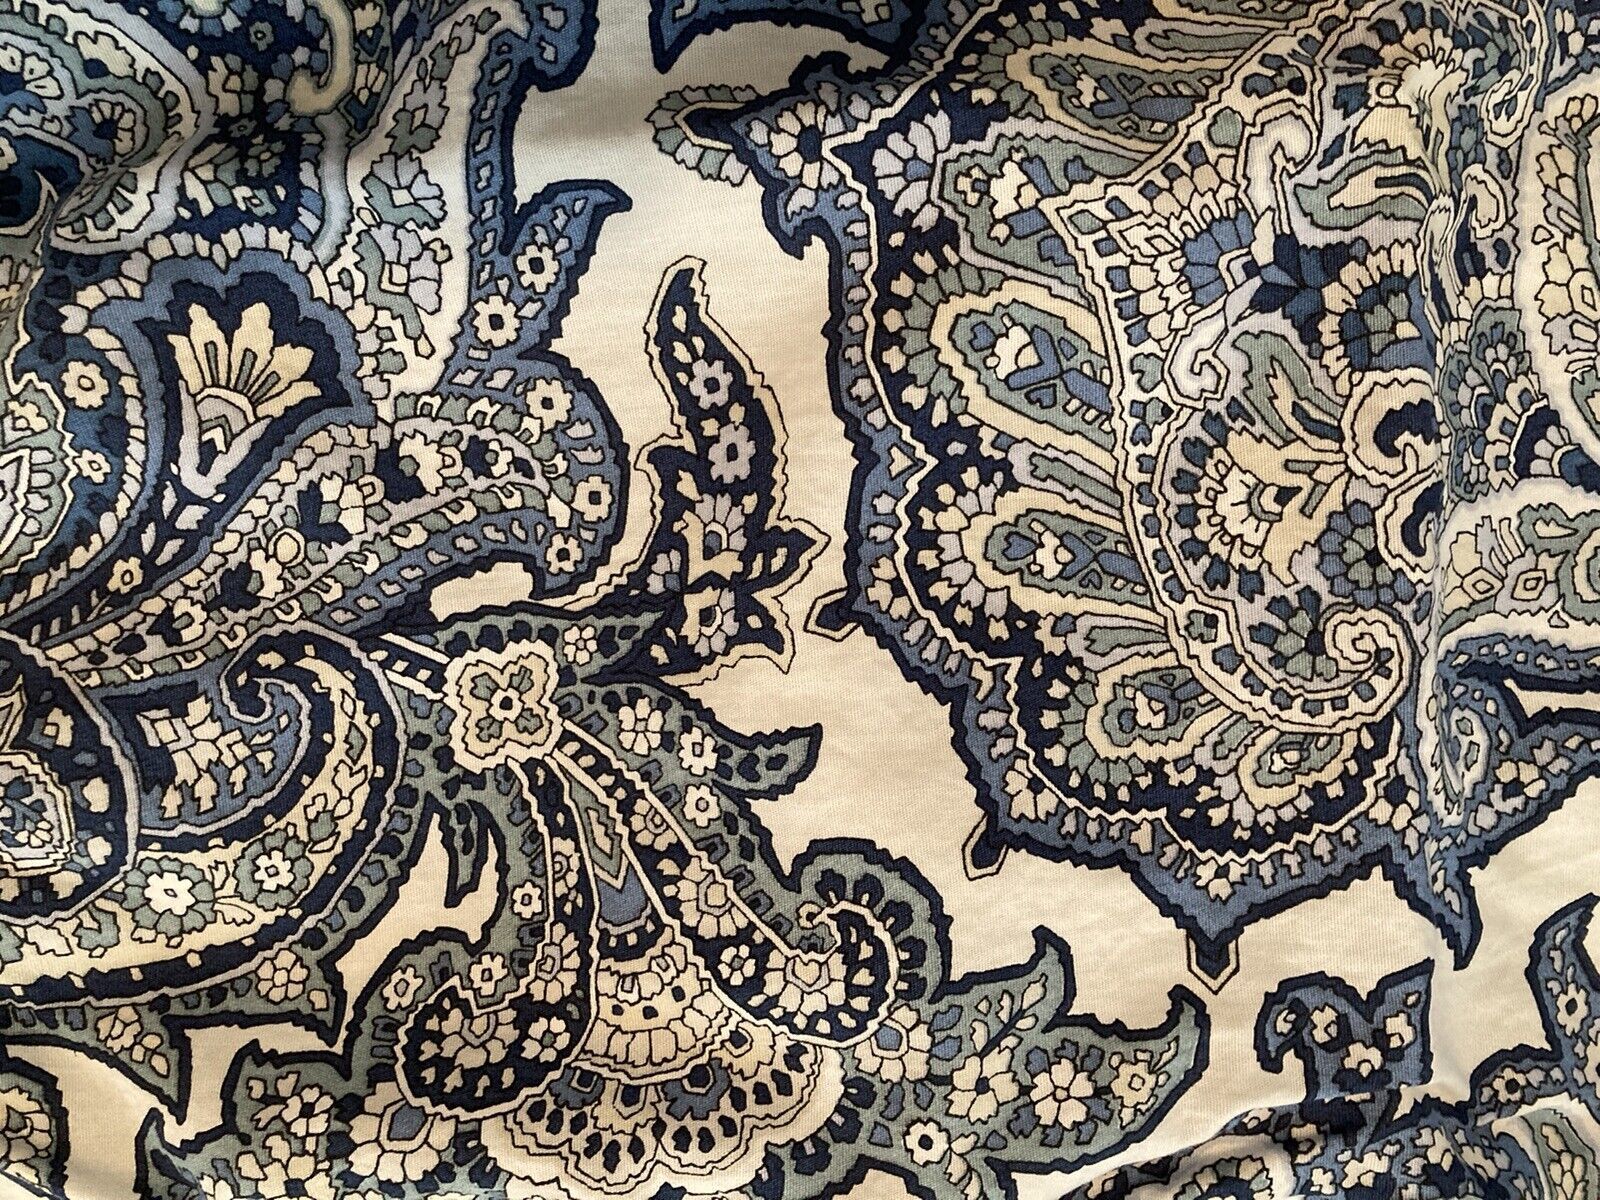 Two Matching Tommy Bahama Home Pillow Cases Cotton Blue White Paisley 24 x 19 - $23.53